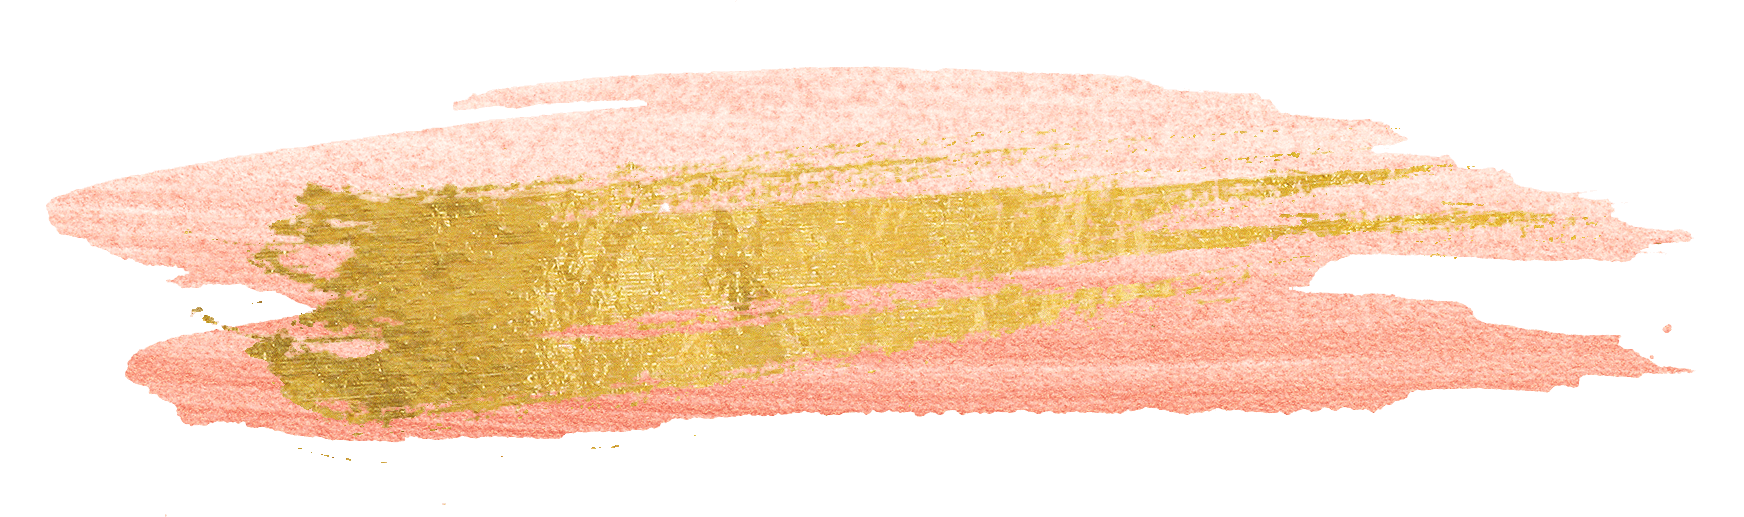 pink painting background image